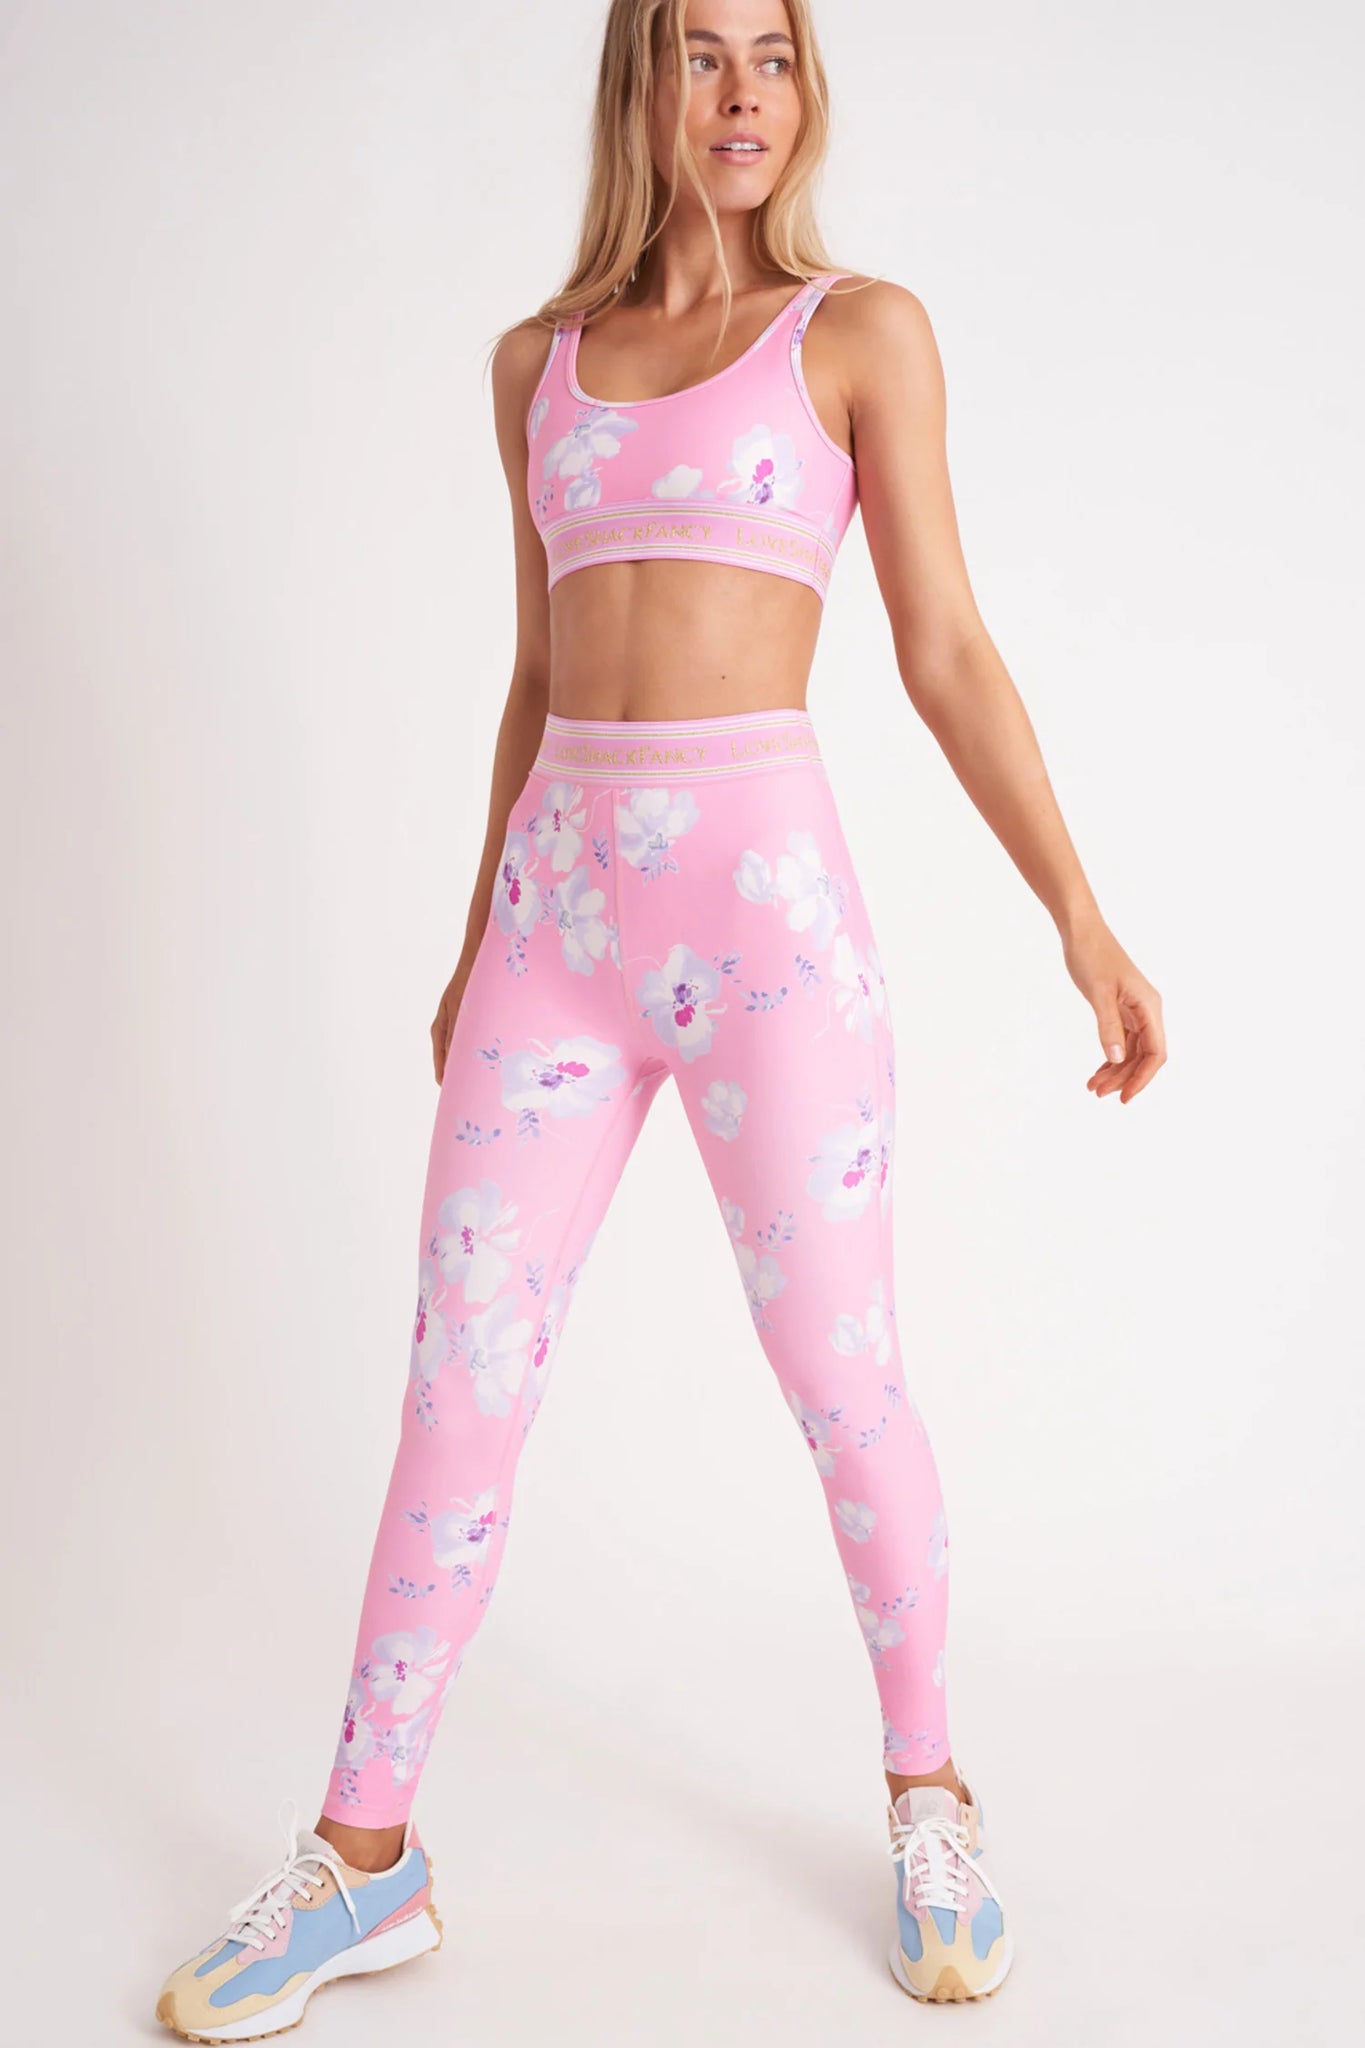 Luvette Leggings- Baby Pink Clouds – By Request